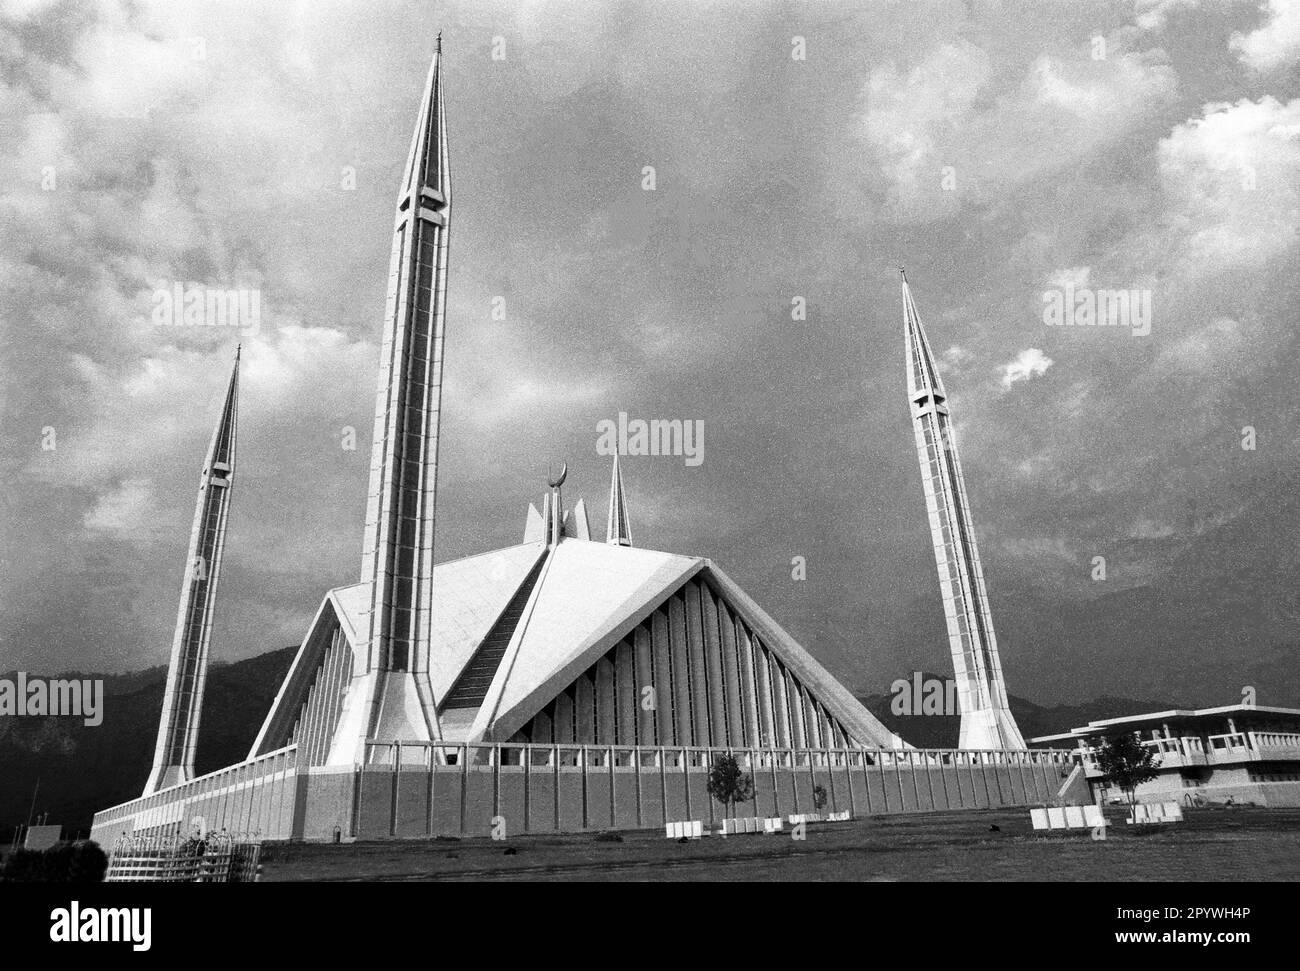 Pakistan, Islamabad, 27.10.1990. Stock No.: 21-59-27 City Photos Islamabad Photo: The Shah Faisal Mosque is the national mosque of Pakistan. It is located in the northwest of the Pakistani capital Islamabad in front of the Margalla Hills. [automated translation] Stock Photo